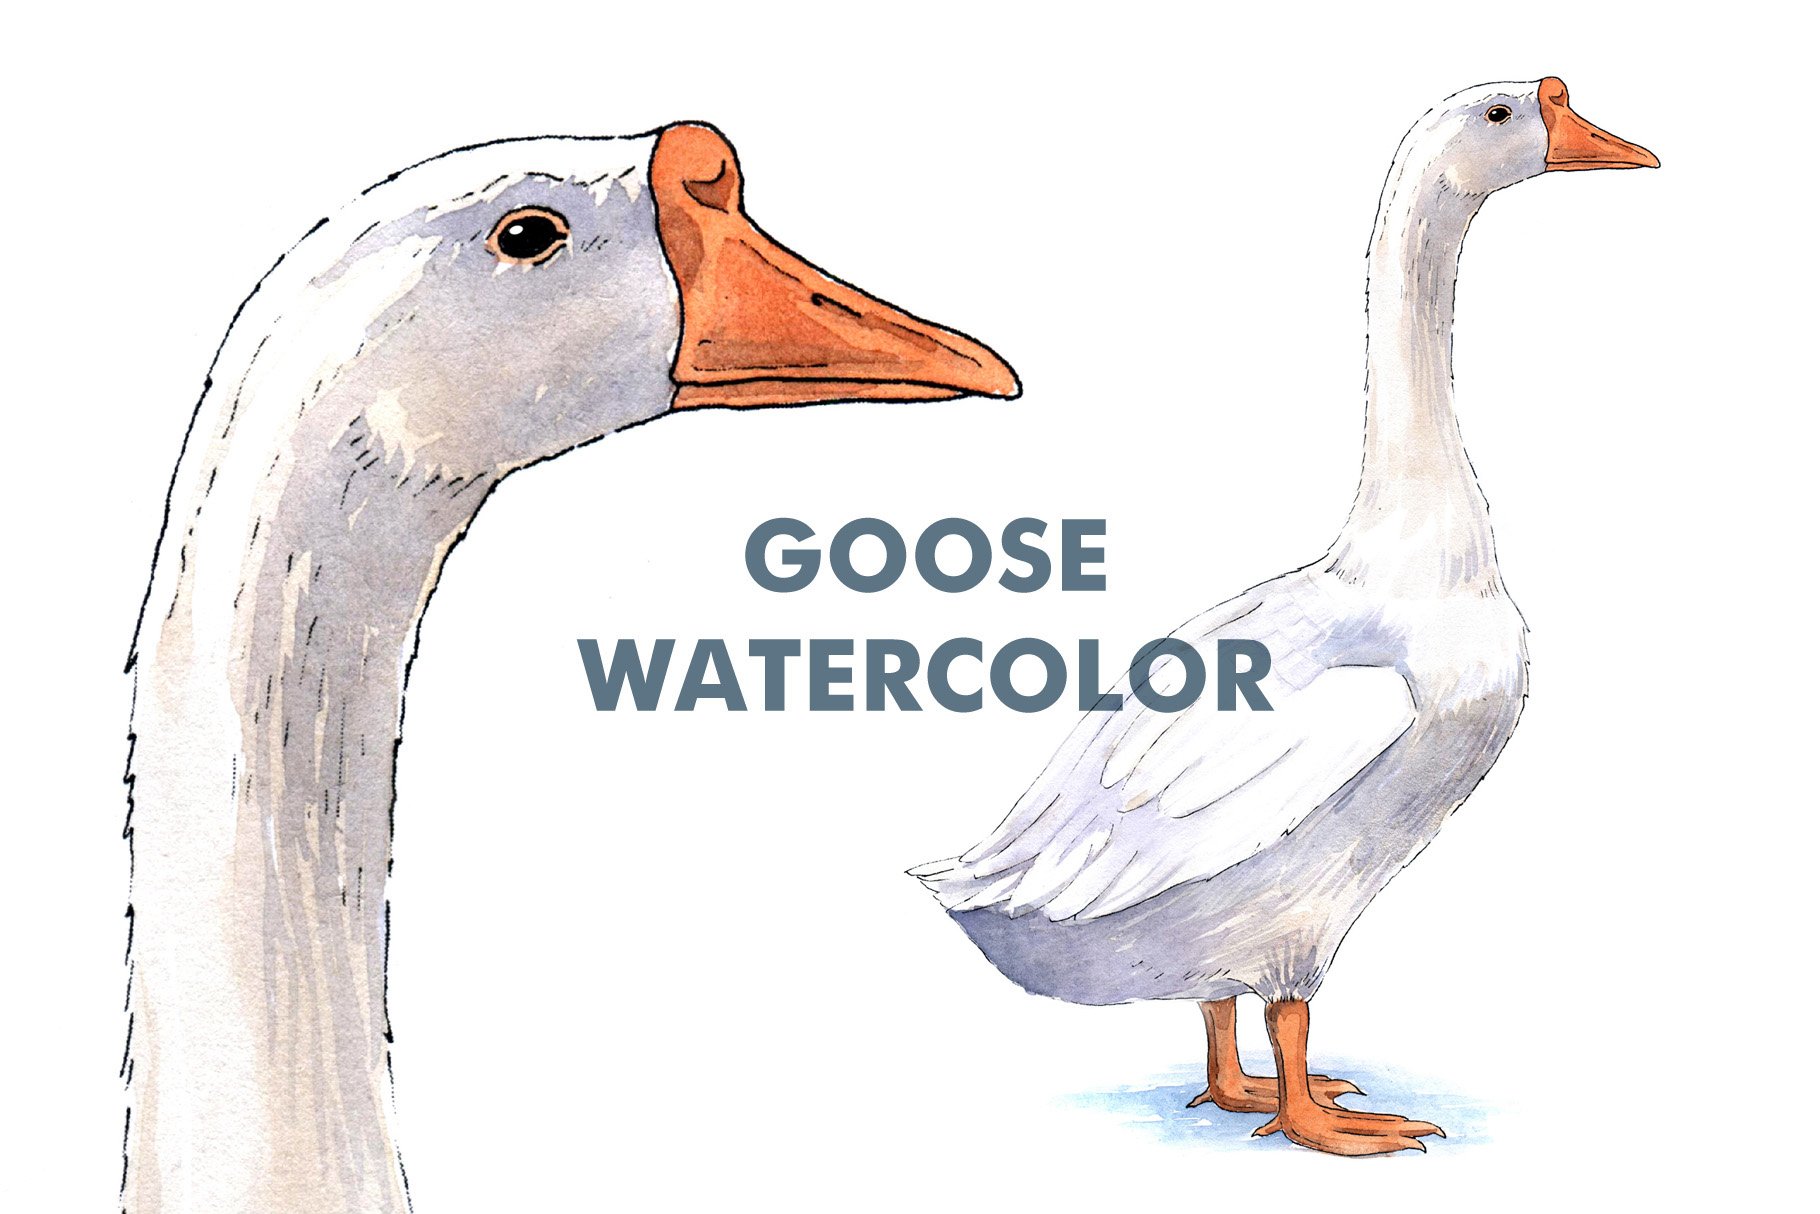 Goose watercolor illustration cover image.